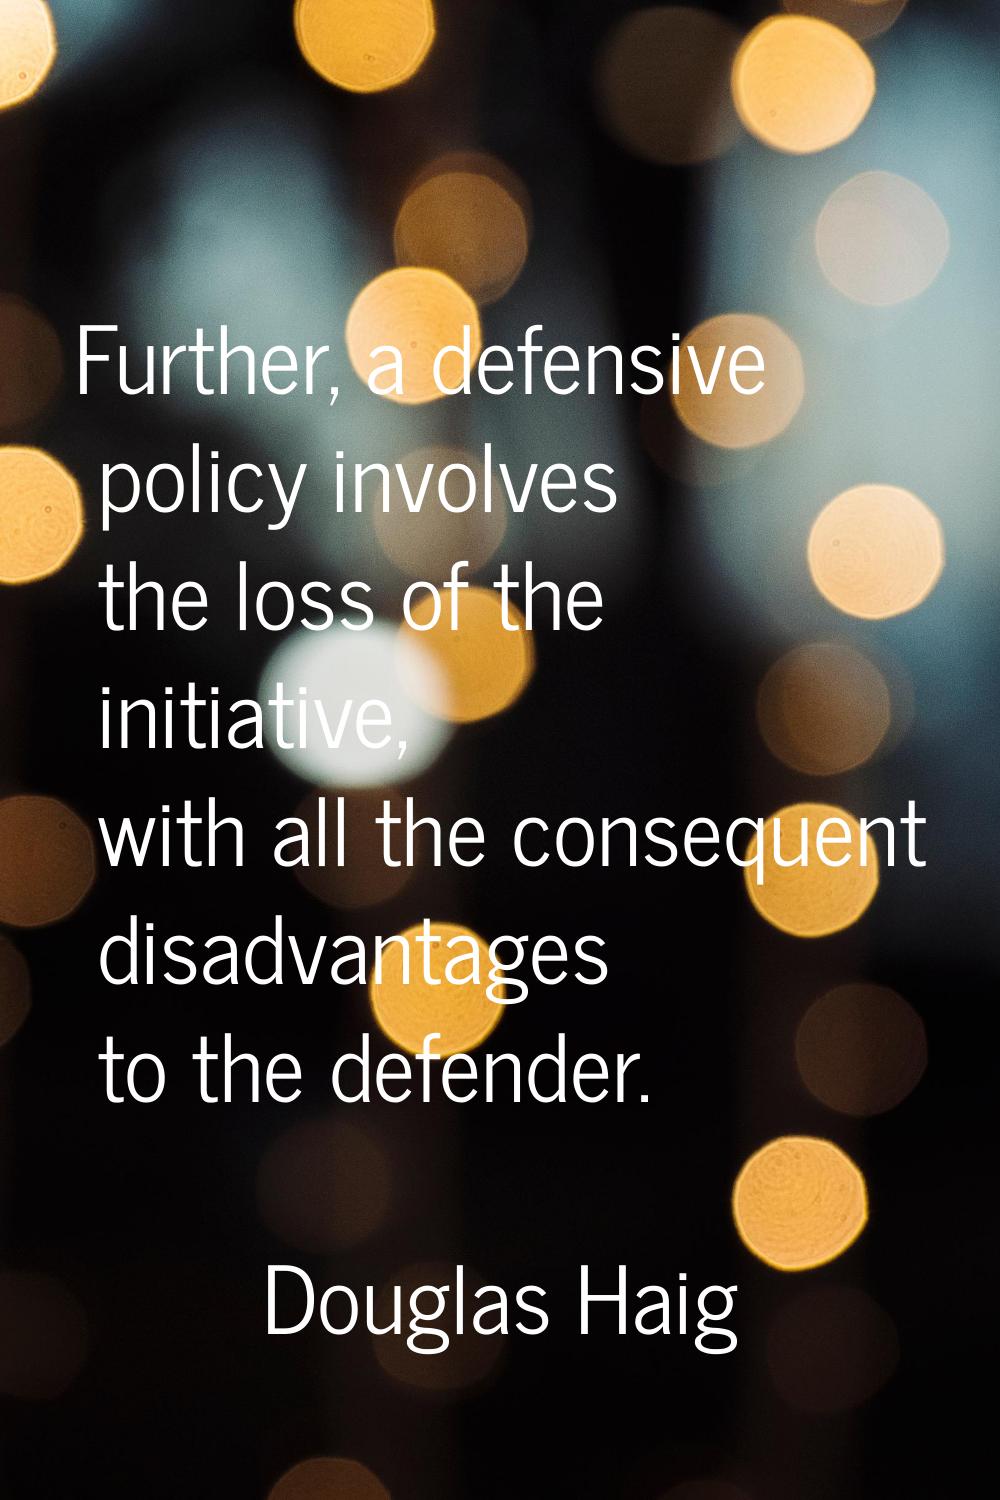 Further, a defensive policy involves the loss of the initiative, with all the consequent disadvanta